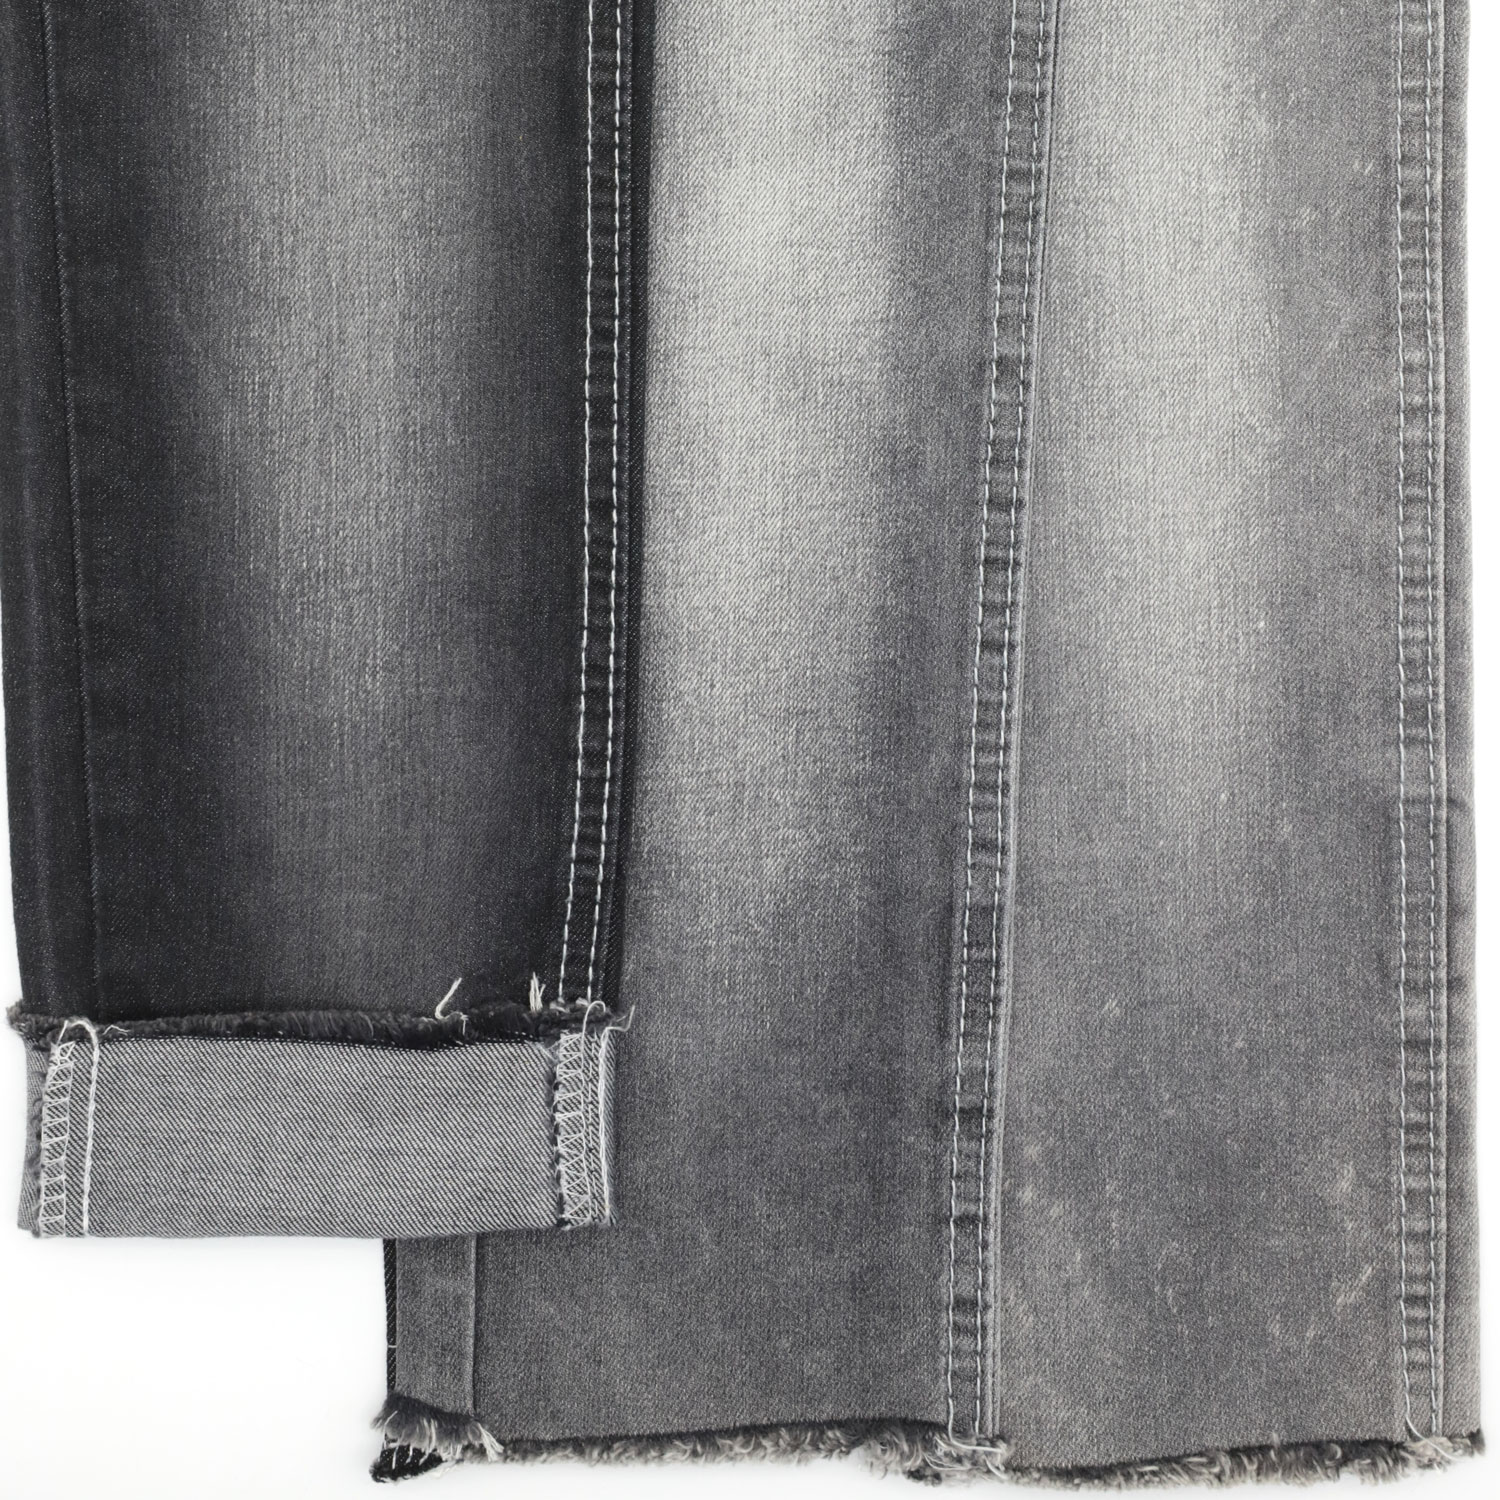 How to Sew Denim: a Beginner's Guide 1